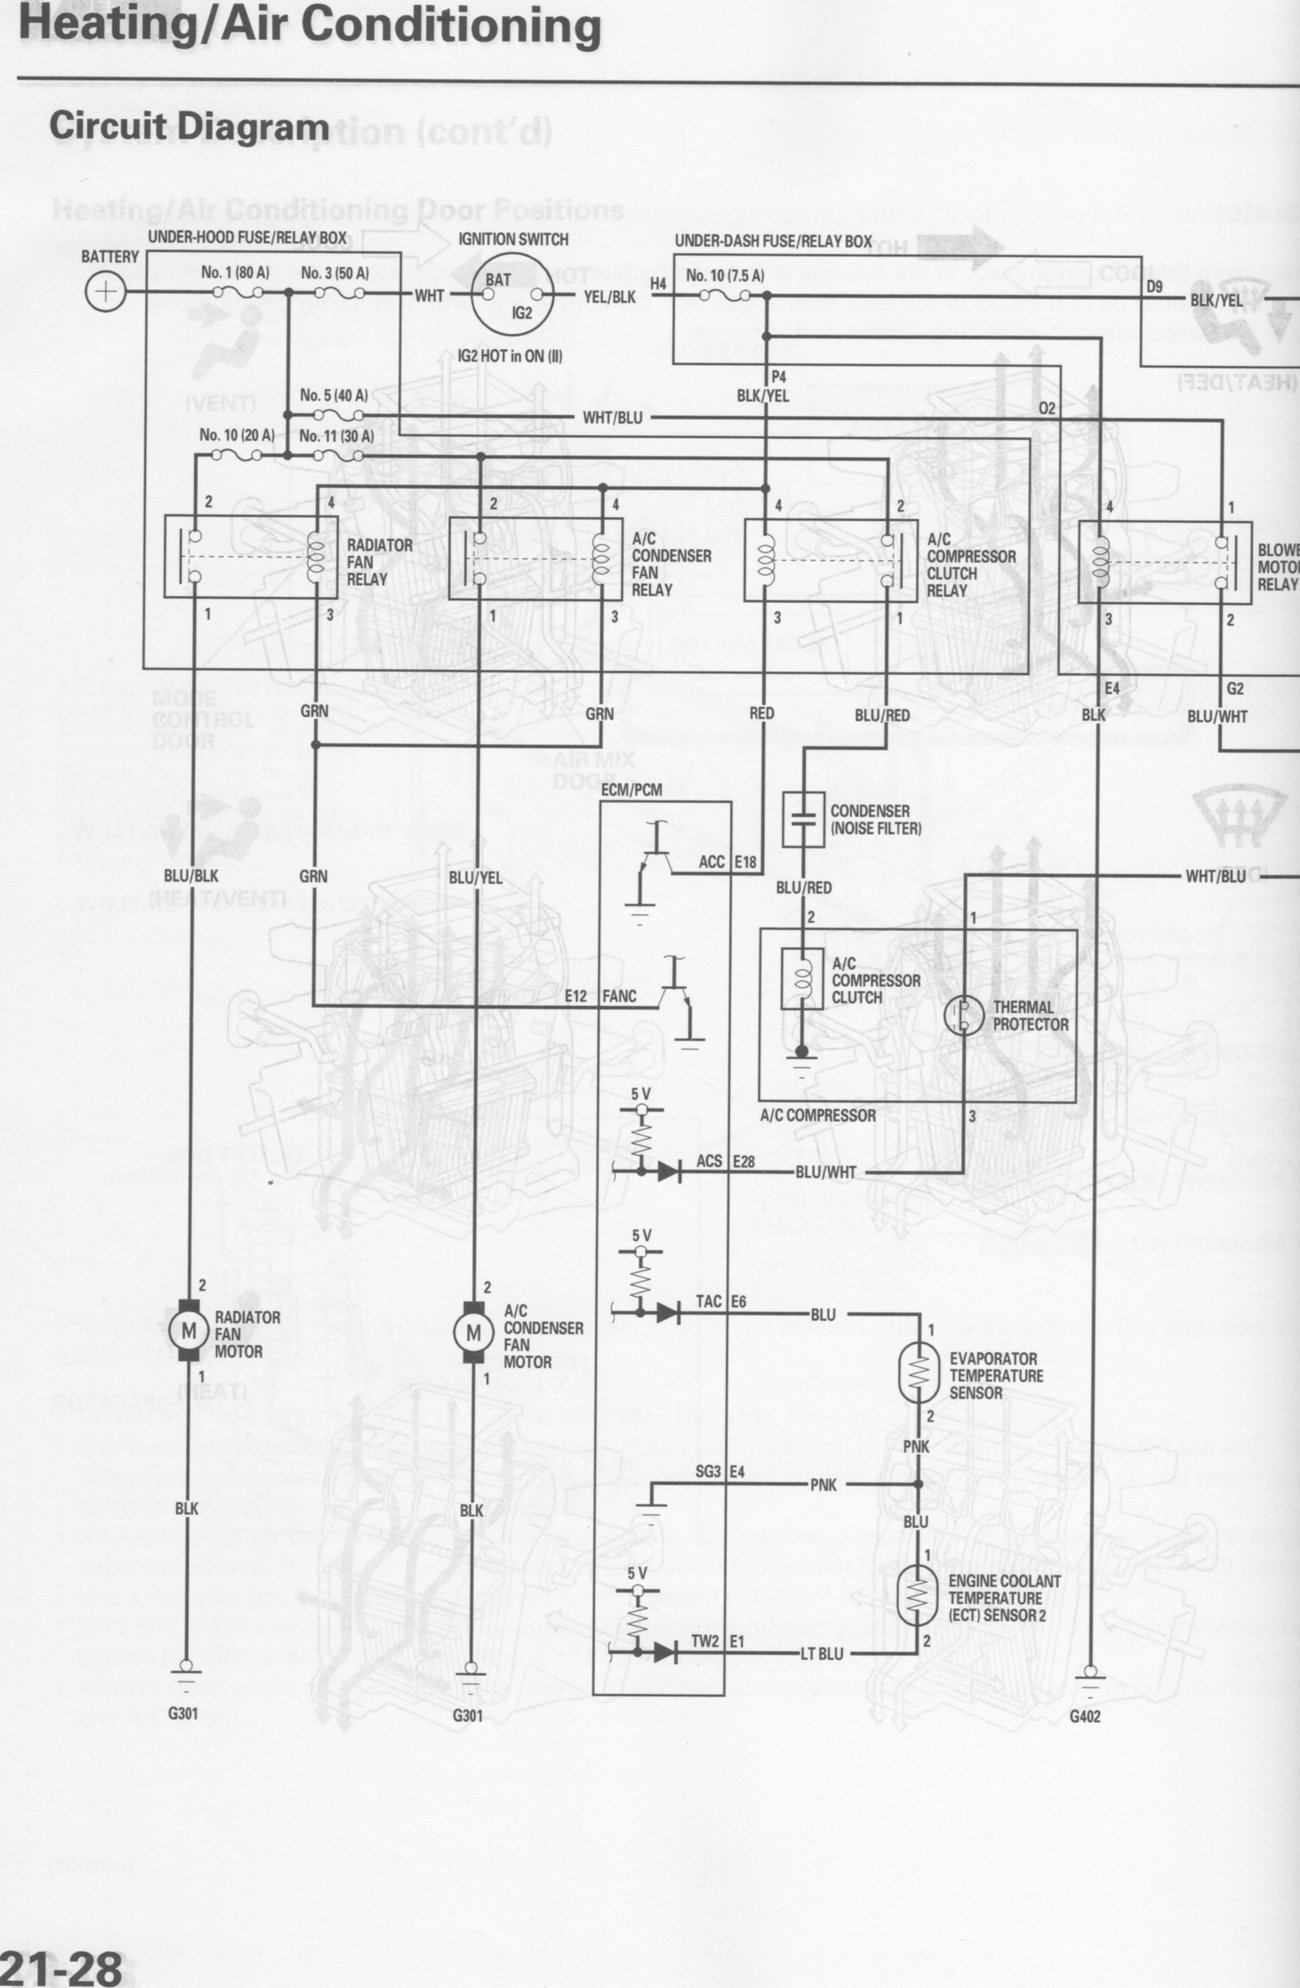 Wiring Schamatic A/C System - Unofficial Honda FIT Forums Honda D16Z6 Wiring-Diagram Unofficial Honda FIT Forums